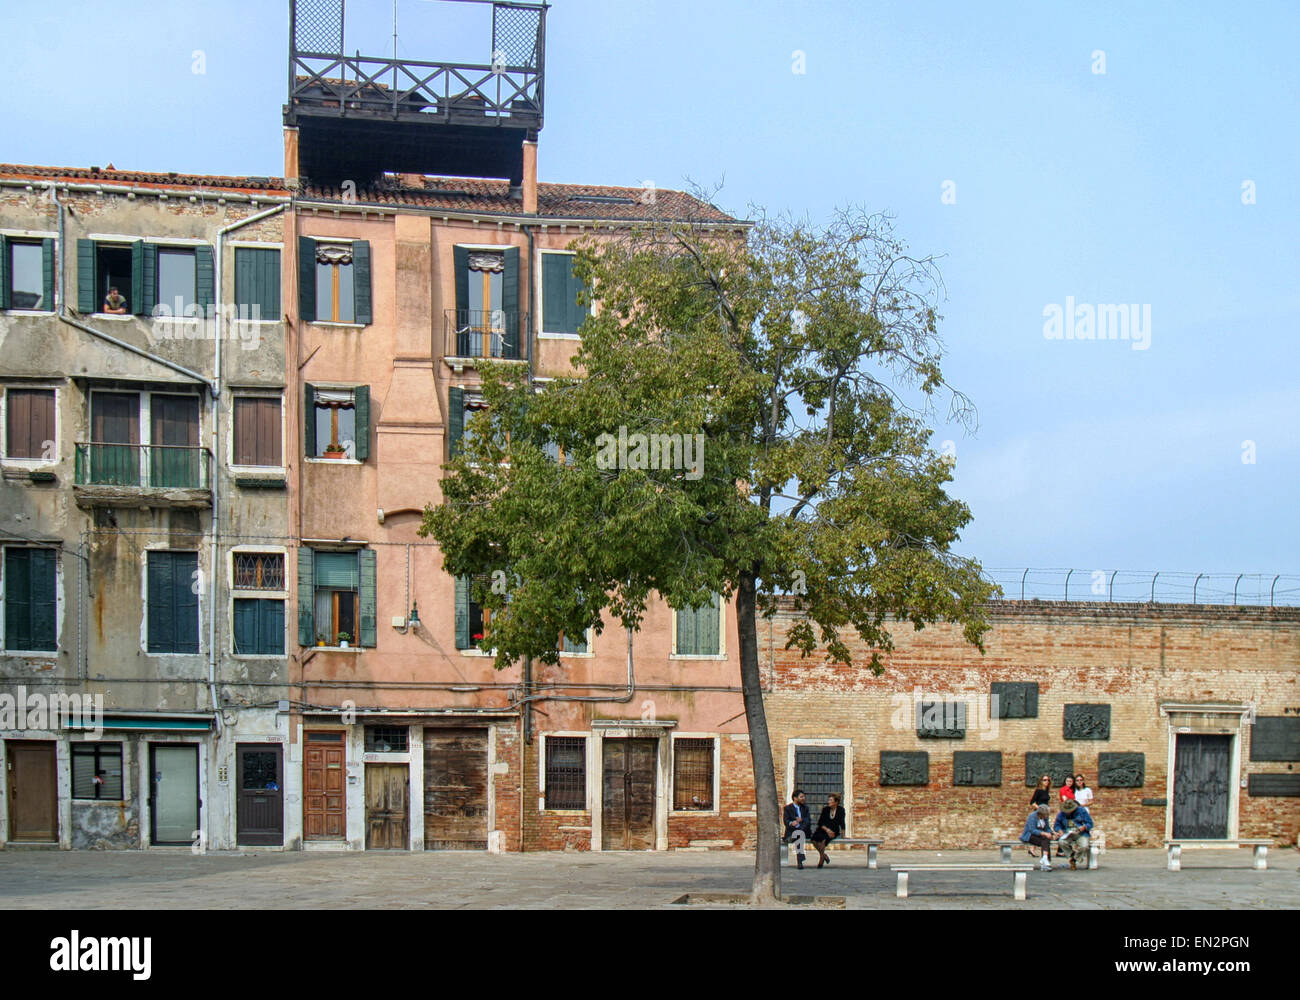 Venice, Province of Venice, ITALY. 7th Oct, 2004. A view of part of the Campo del Nuovo Ghetto, the main square of the present-day Venetian Ghetto. At right is Holocaust Memorial that commemorates the night of Dec. 5, 1943, when the first 200 of the city's Jews were rounded up and marched out for deportation and death. Venice, a UNESCO World Heritage Site, is one of the most popular international tourist destinations. © Arnold Drapkin/ZUMA Wire/Alamy Live News Stock Photo